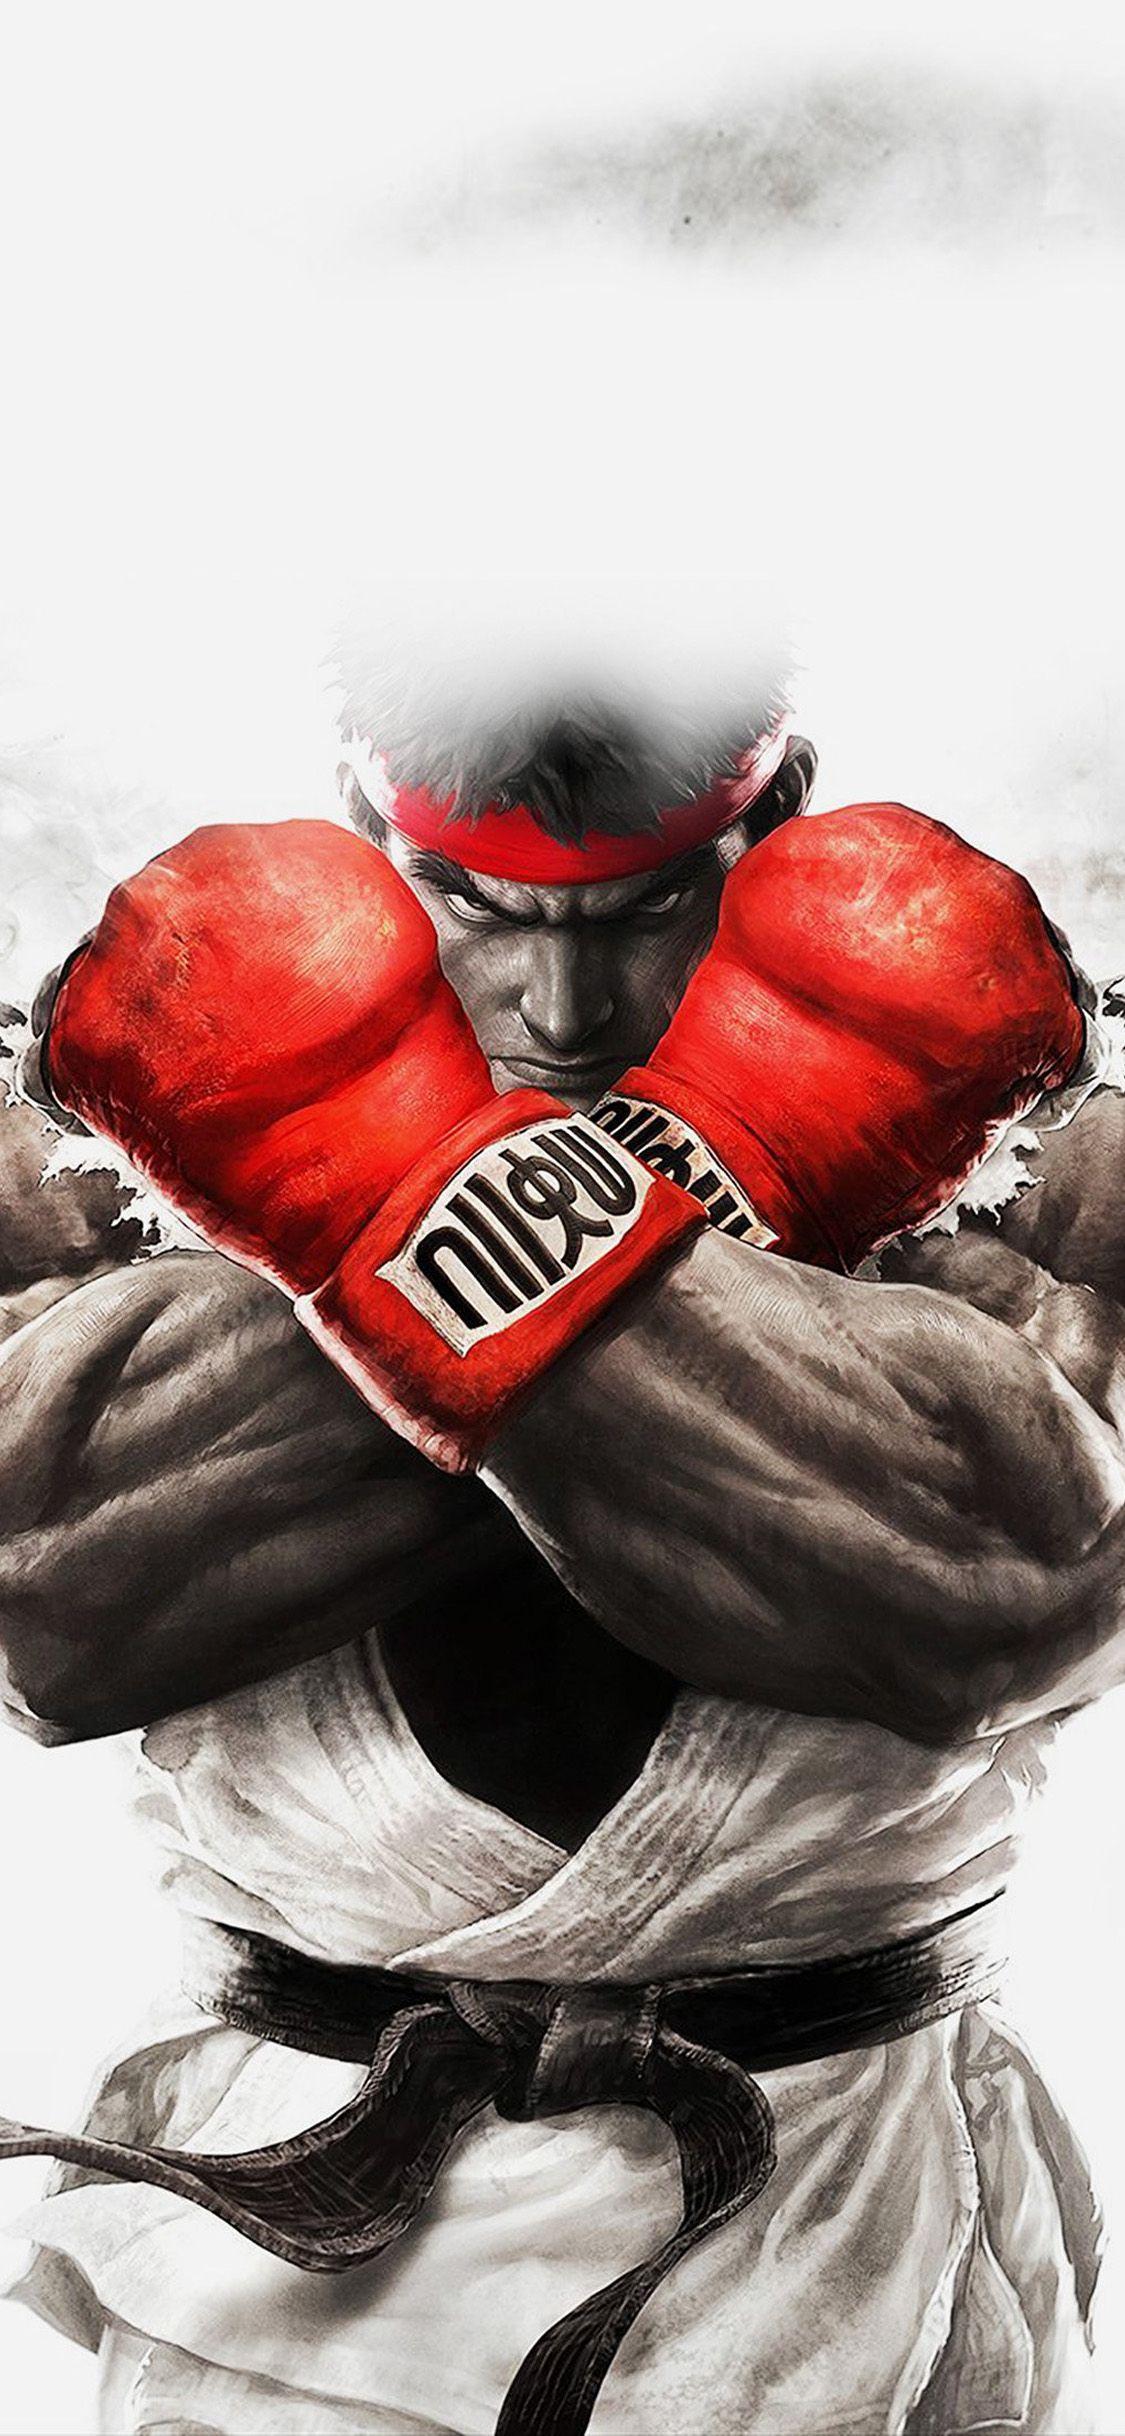 Street fighter ryu game iPhone 8 Wallpaper. HD iPhone8 Wallpaper